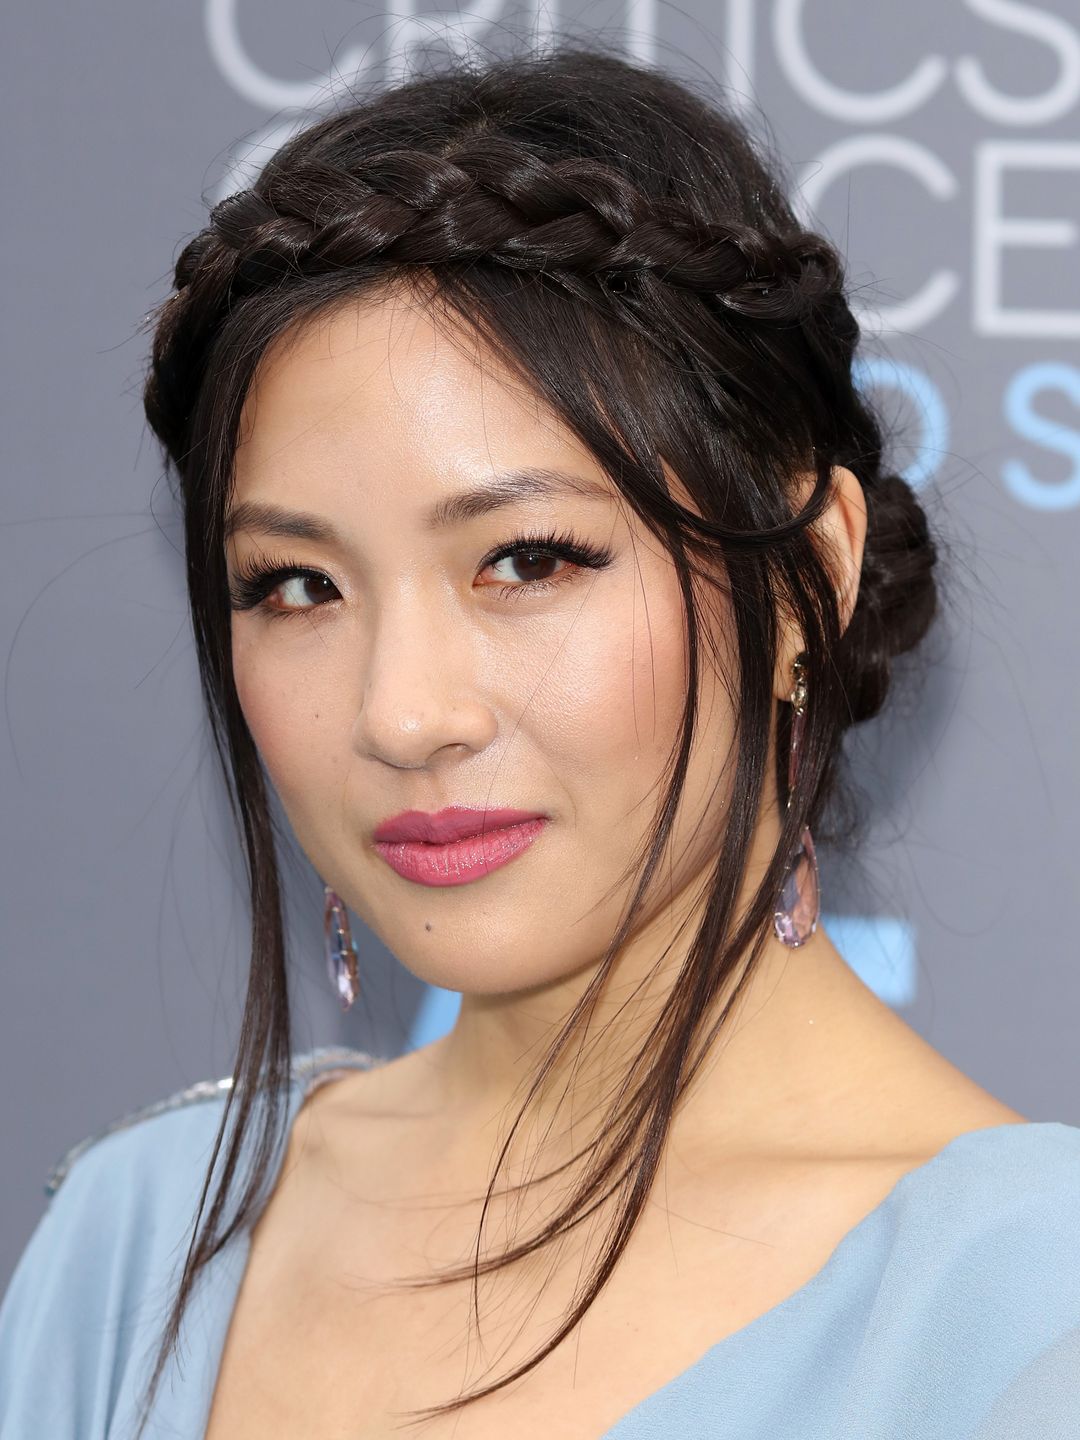 Constance Wu young age